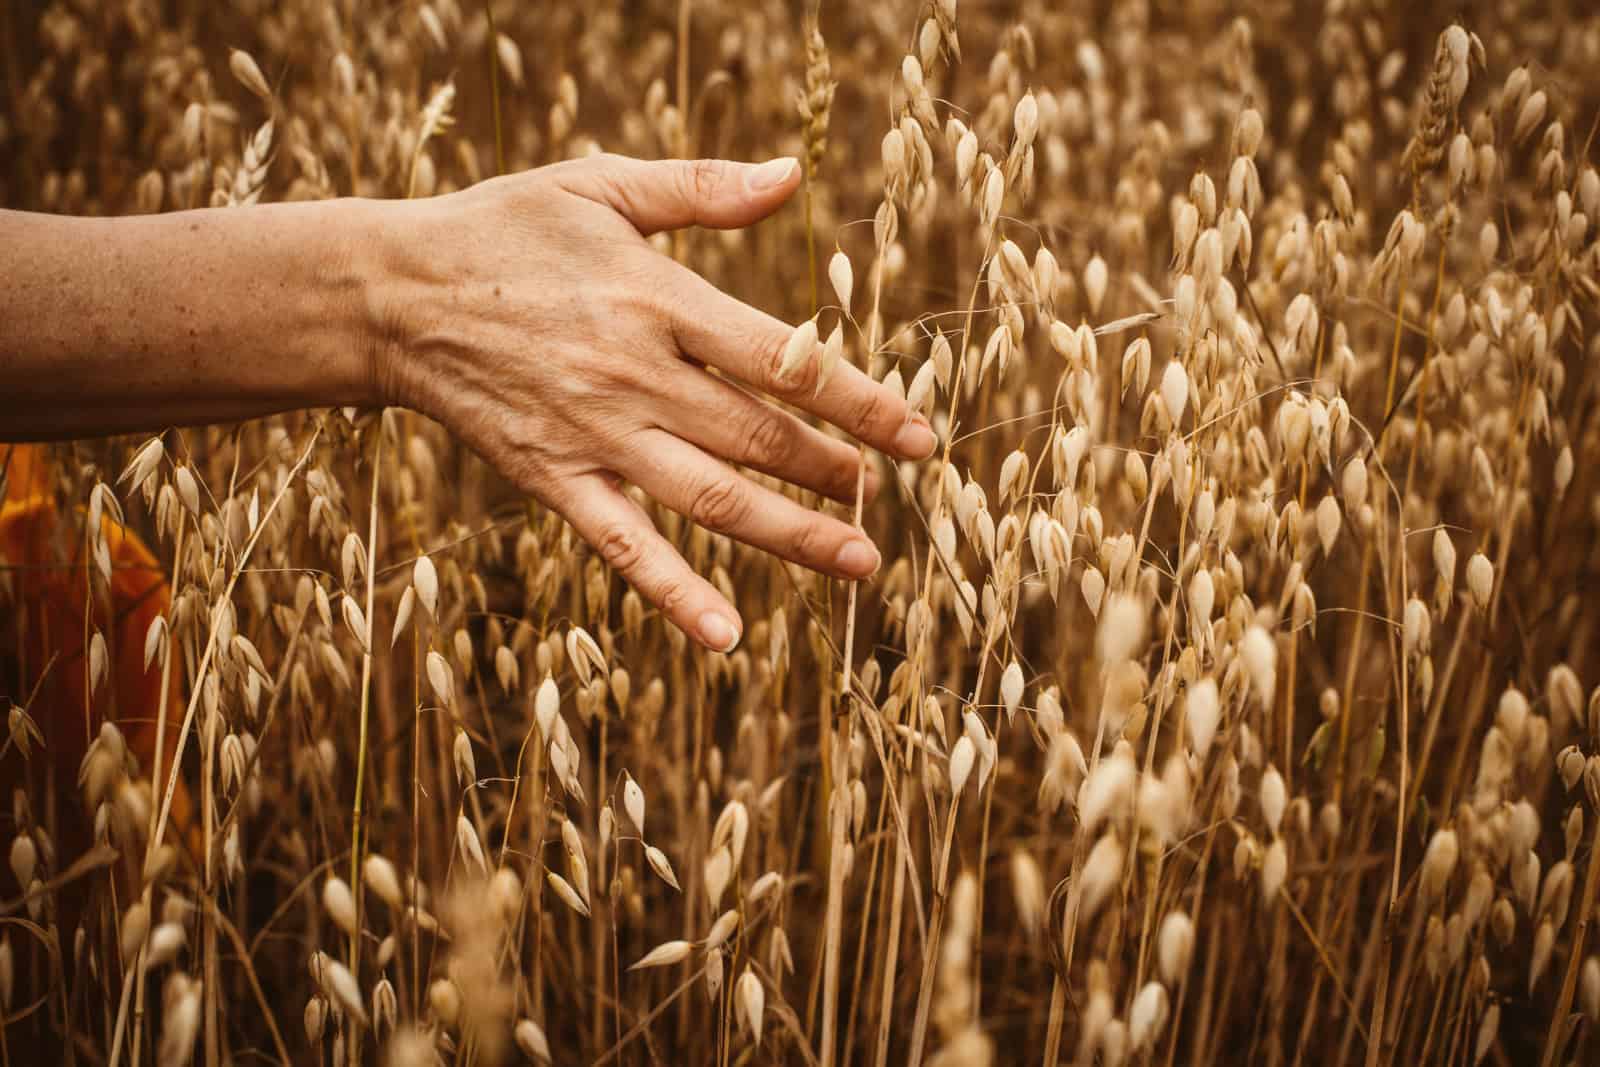 Farmer's tanned female hand strokes spikelets of oats